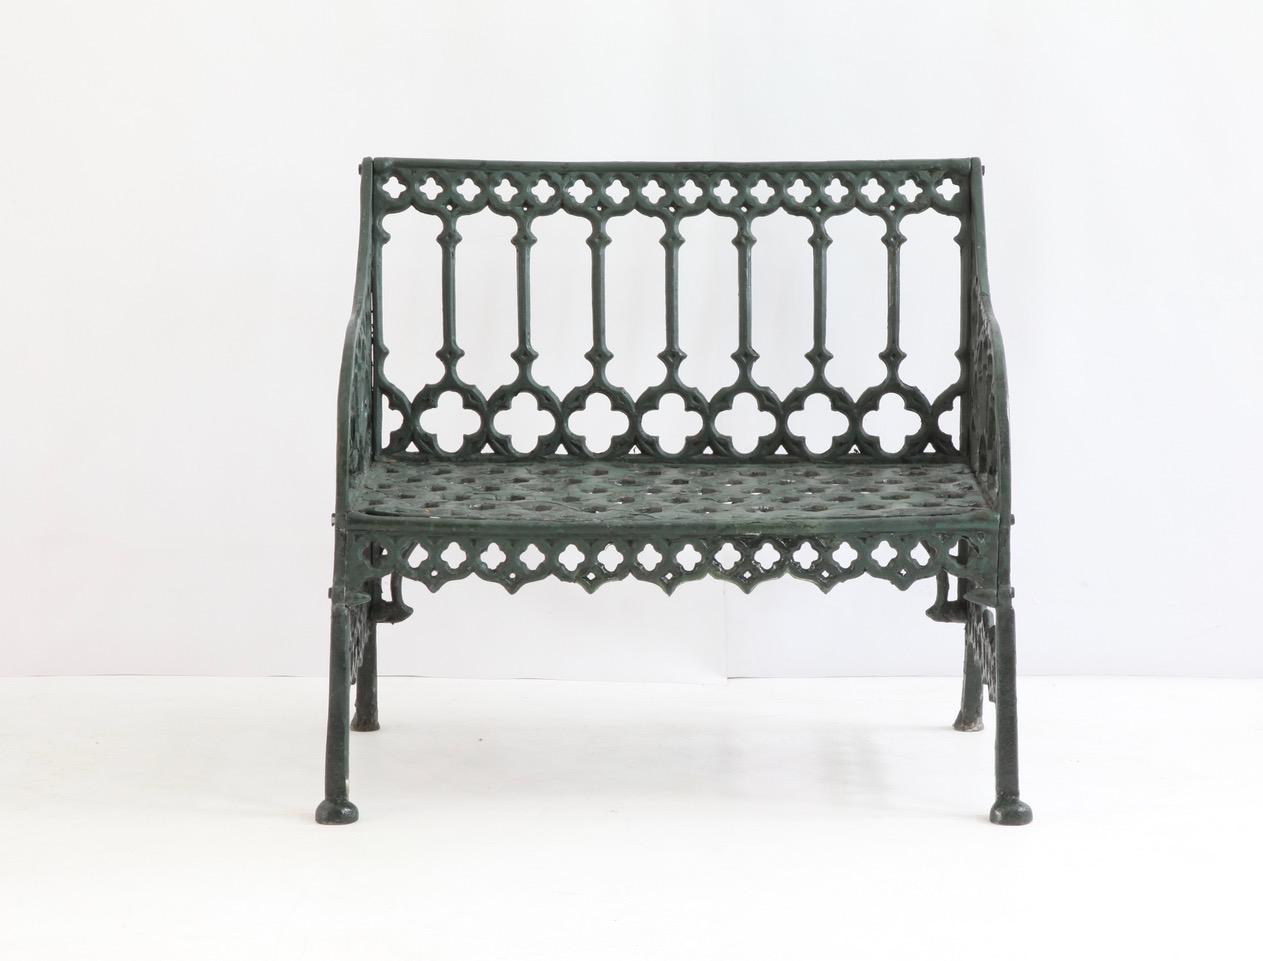 An English Victorian style, green painted garden bench.

